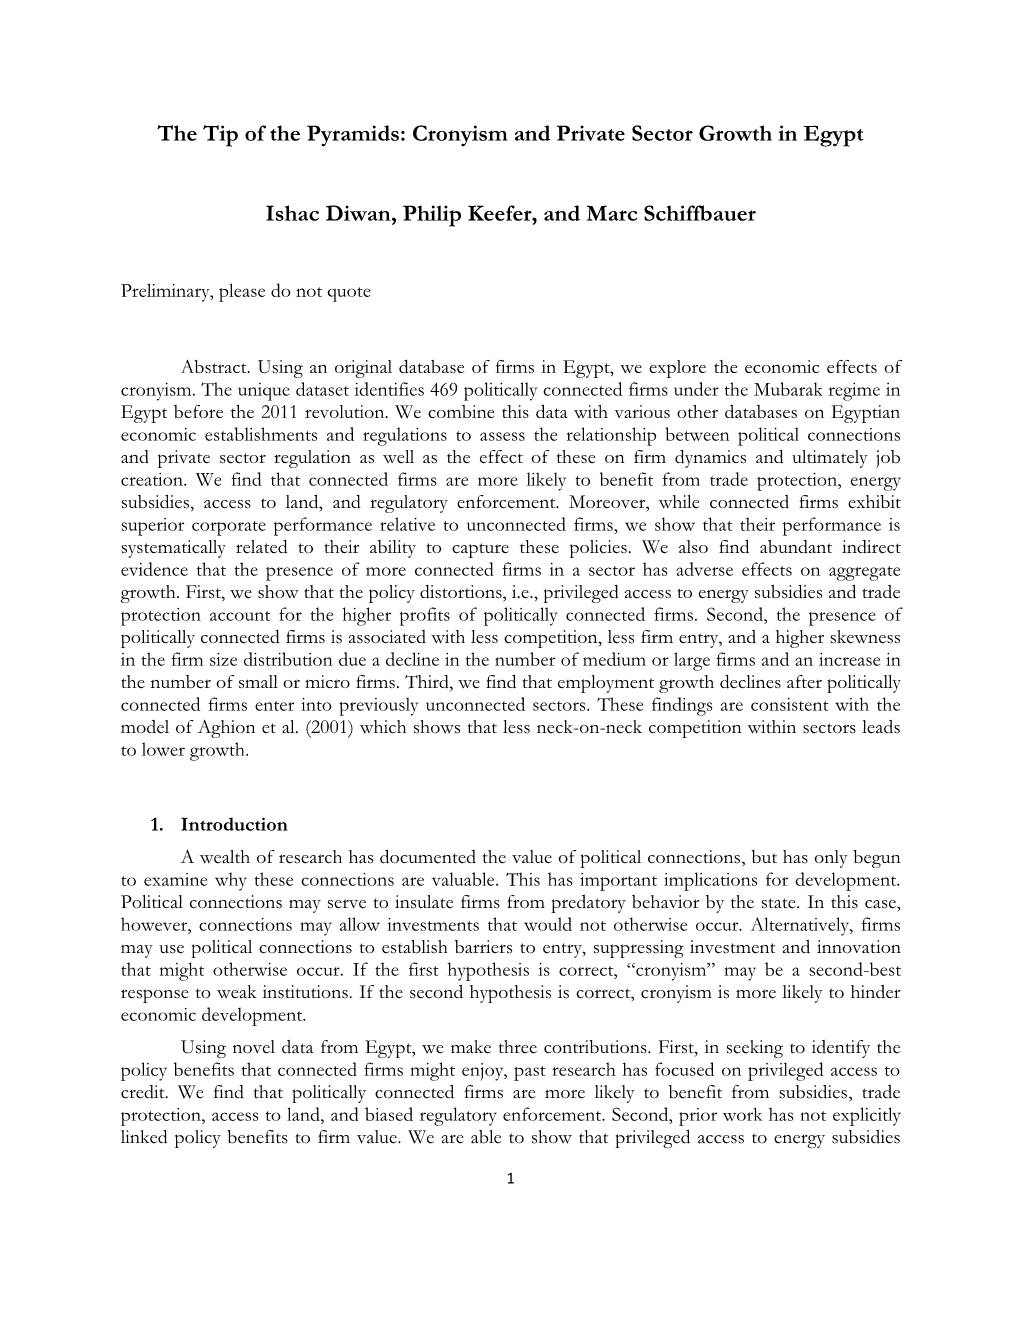 Cronyism and Private Sector Growth in Egypt Ishac Diwan, Philip Keefer